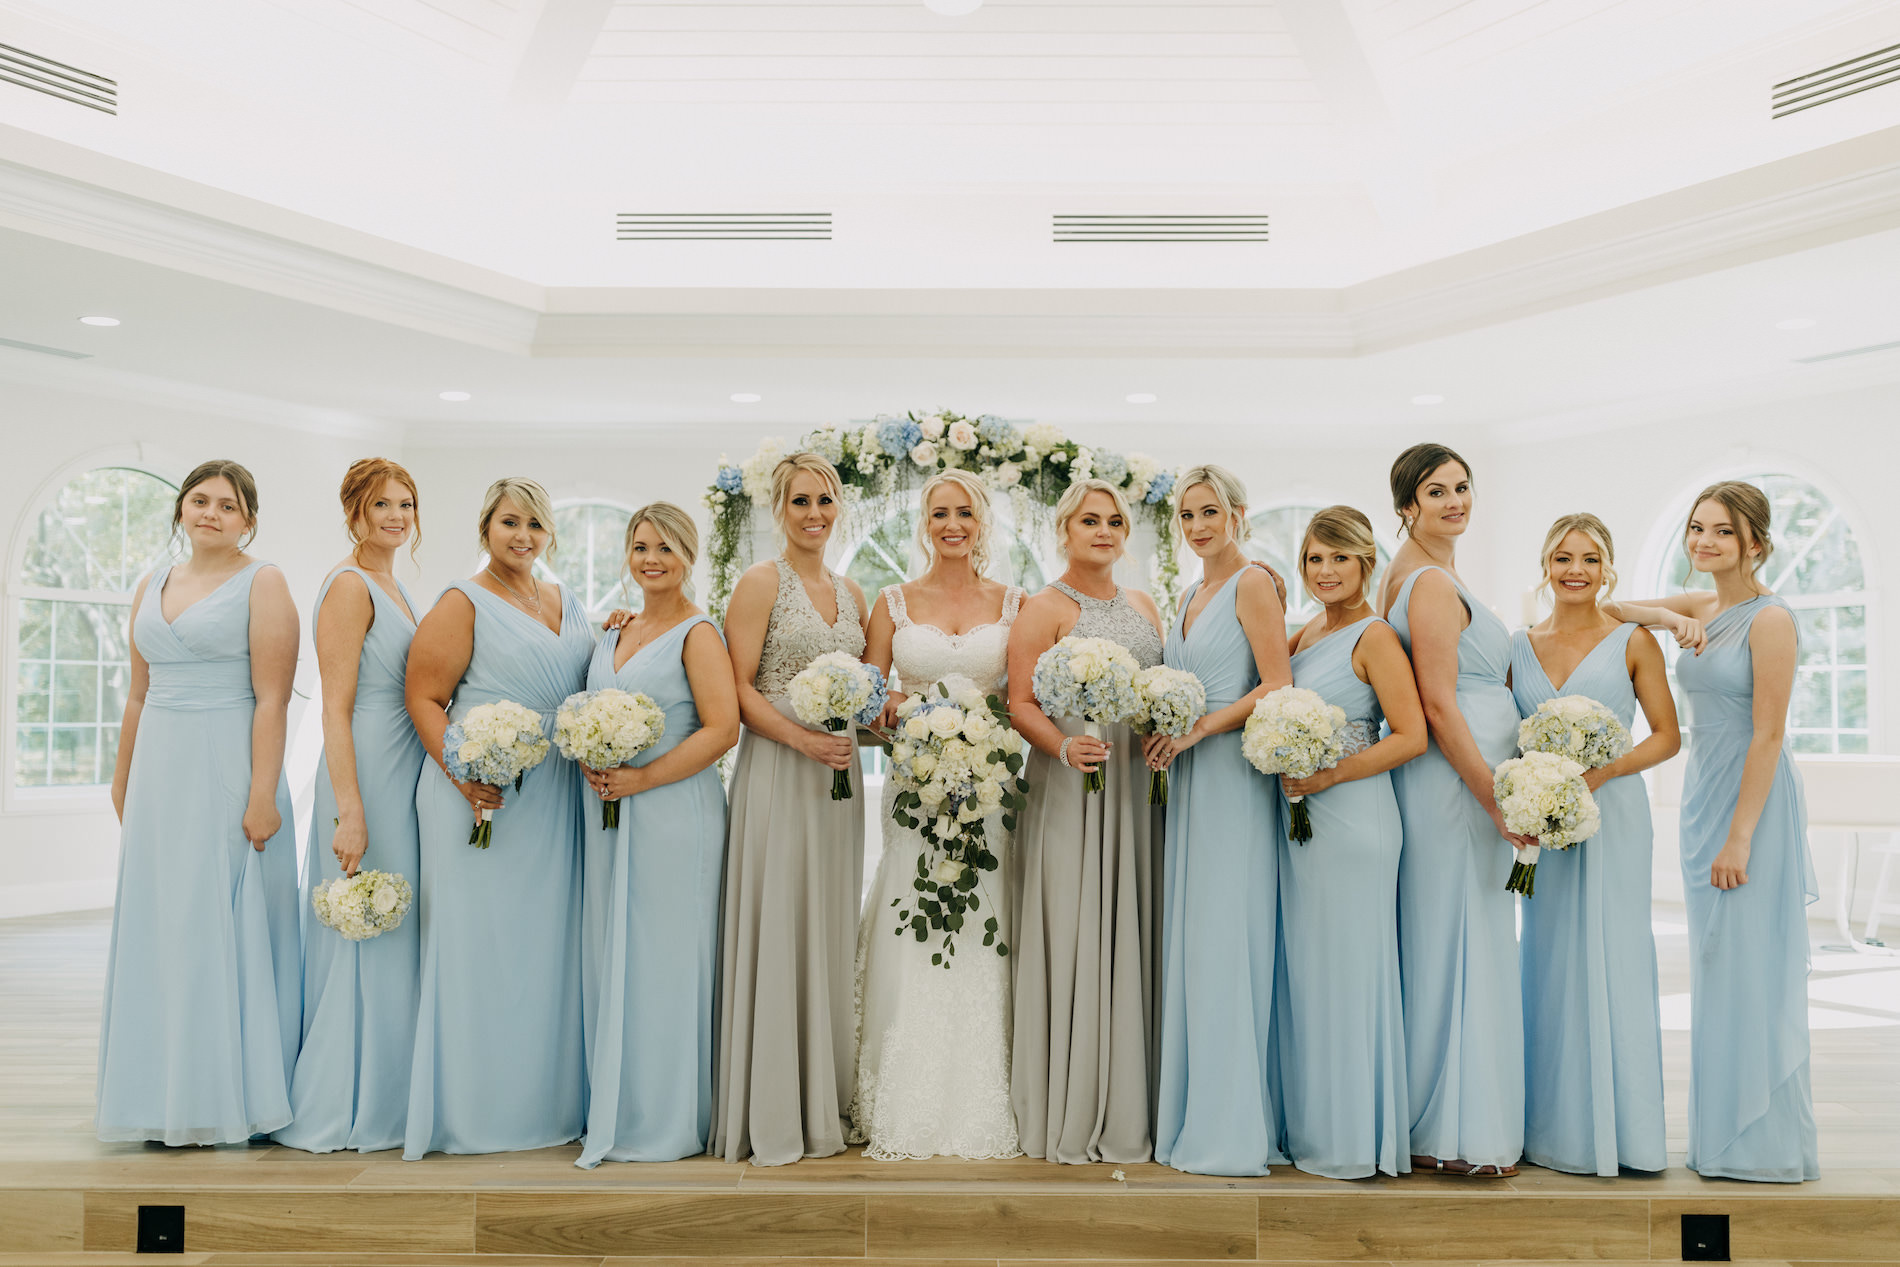 Florida Bride and Bridesmaids in Mix and Match Powder Blue and Silver Dresses Holding White Hydrangeas Floral Bouquets | Traditional Church Wedding Ceremony Venue Harborside Chapel